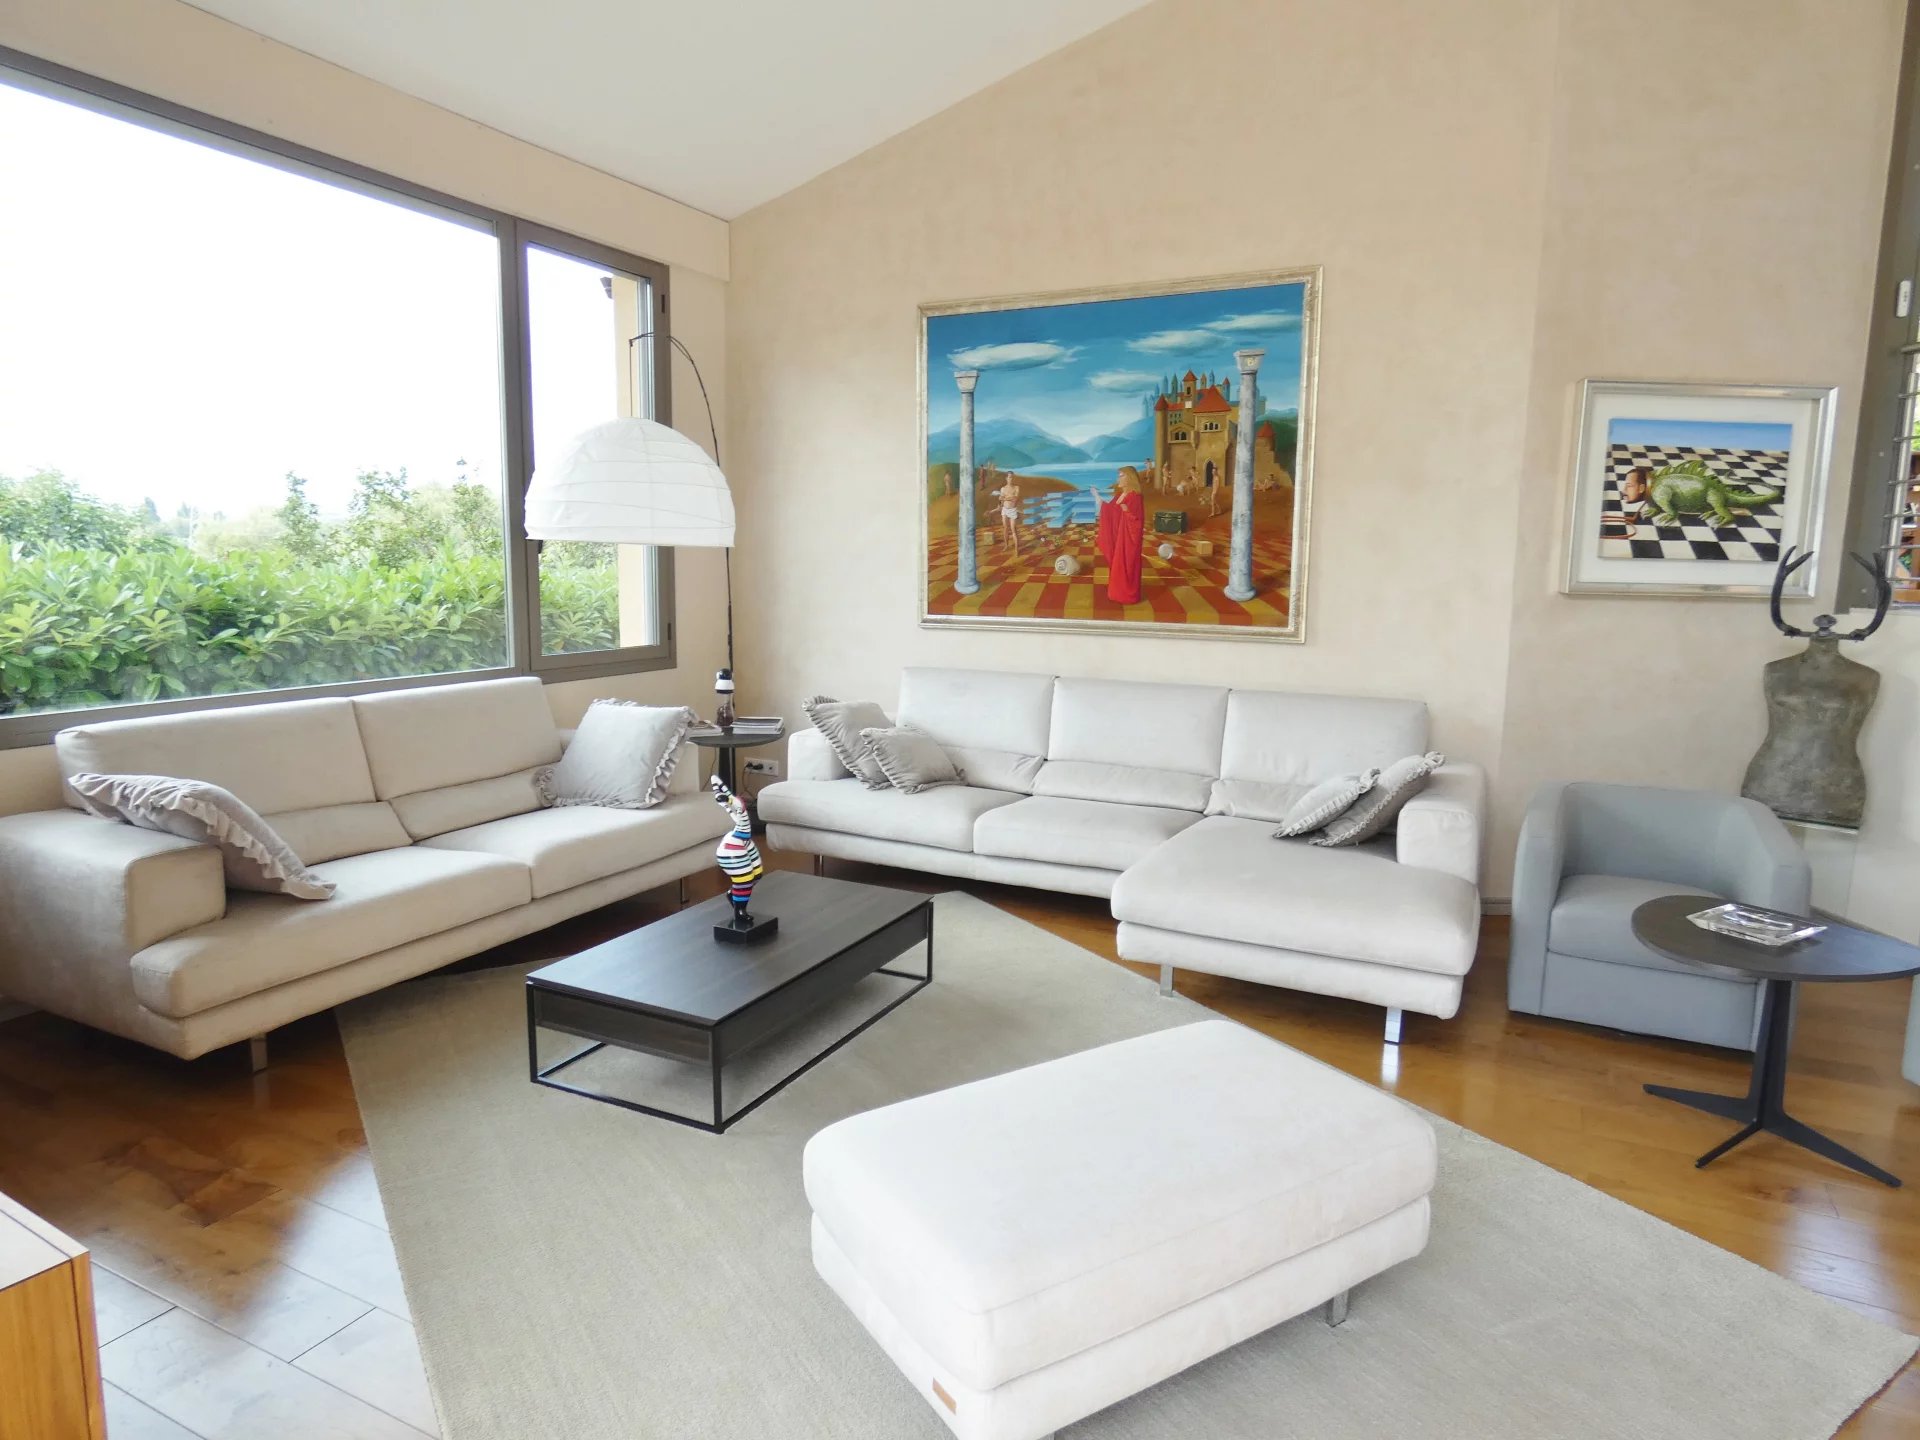 VERY SPACIOUS VILLA WITH DOMINANT WIEW ON THE OLD VILLAGE